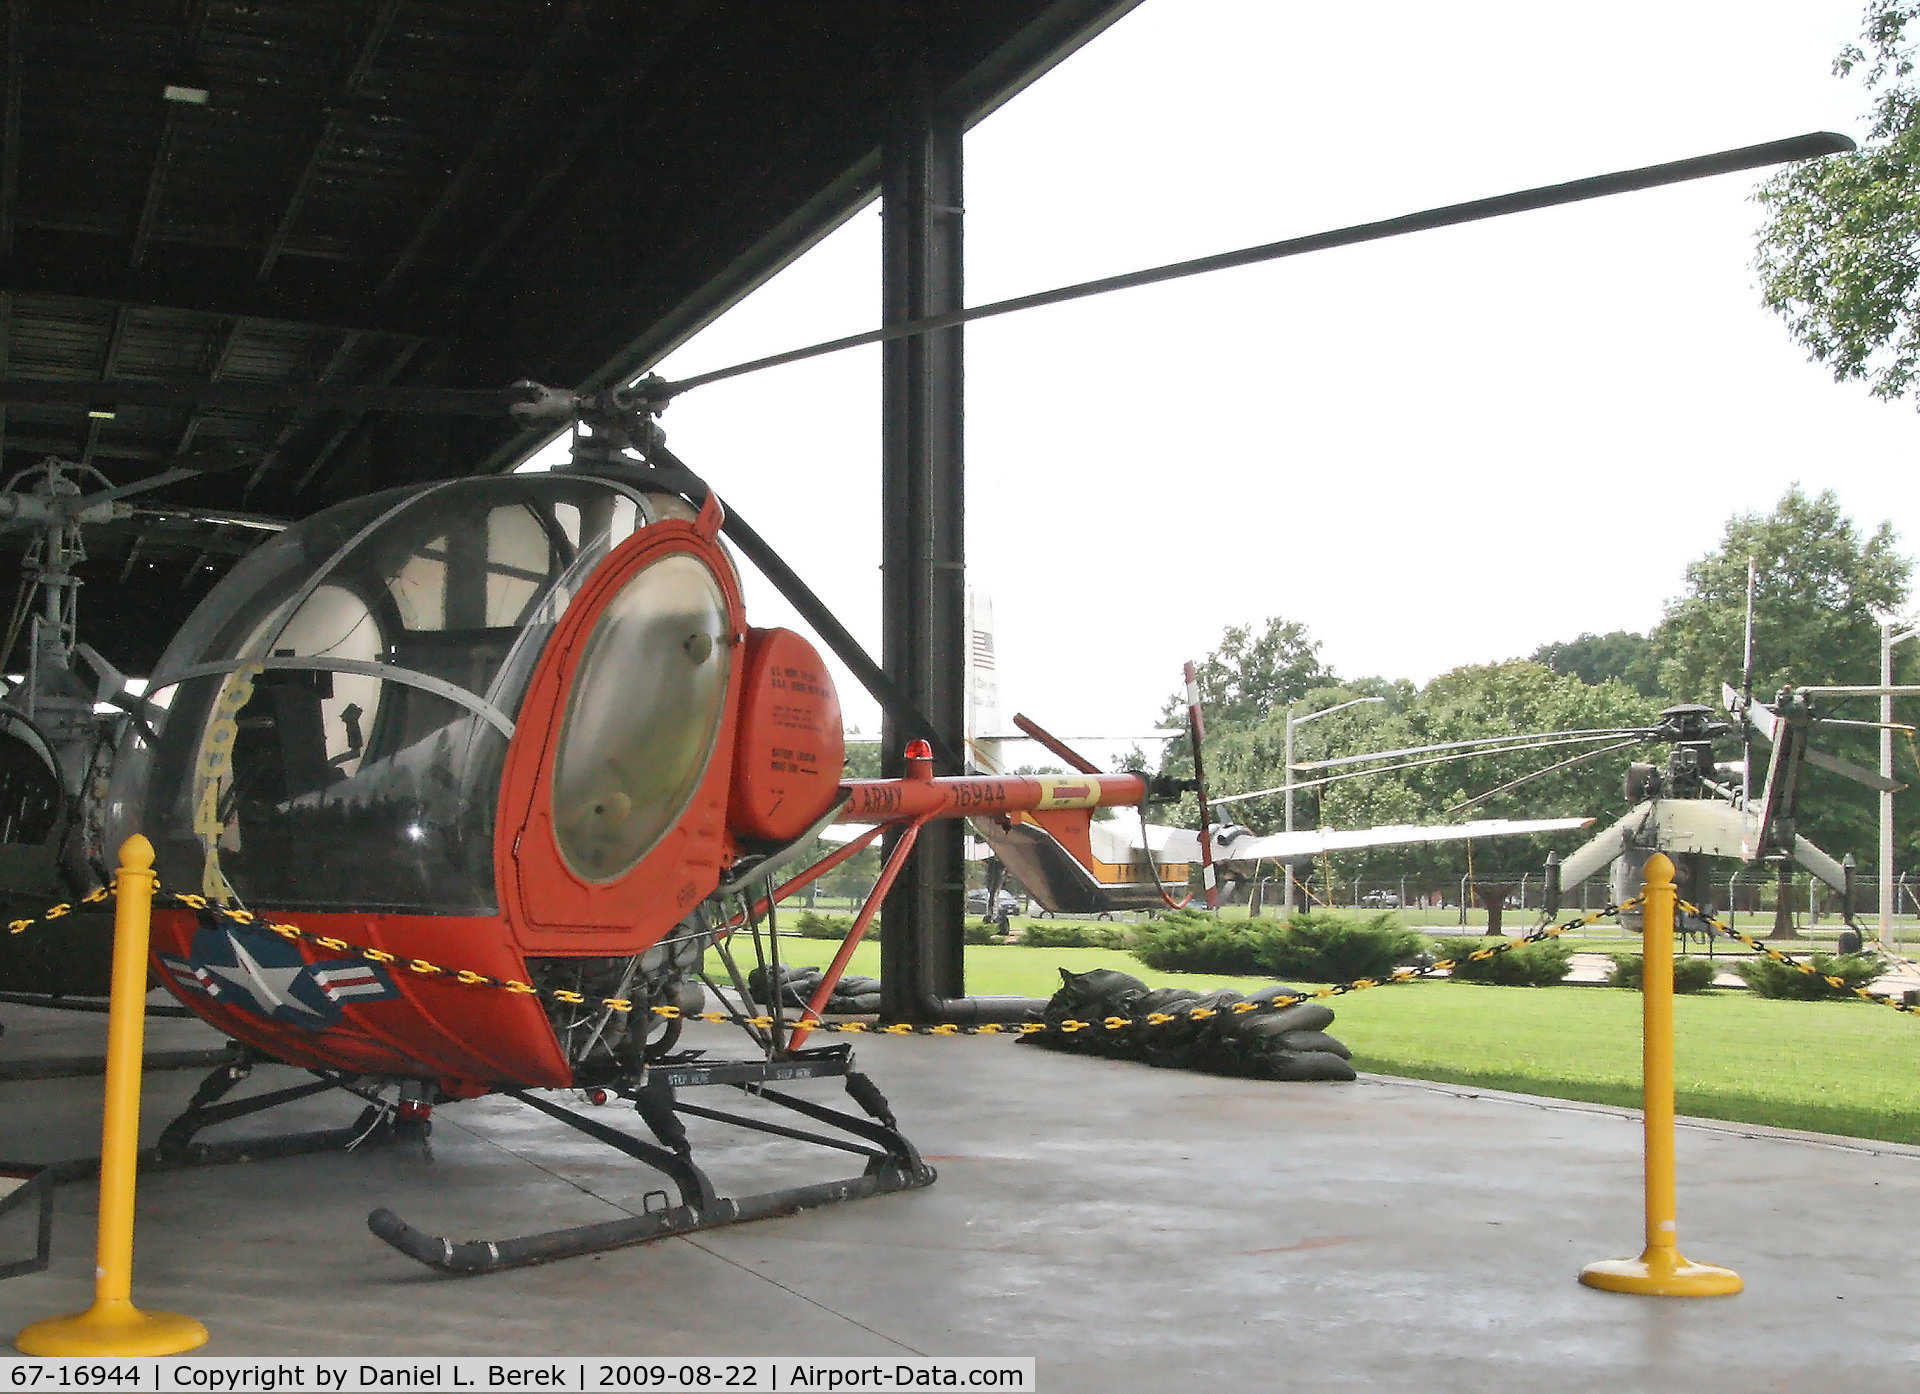 67-16944, 1967 Hughes TH-55A Osage C/N 19-1061, This bright Army helicopter is on display at the US Army Transport Museum.